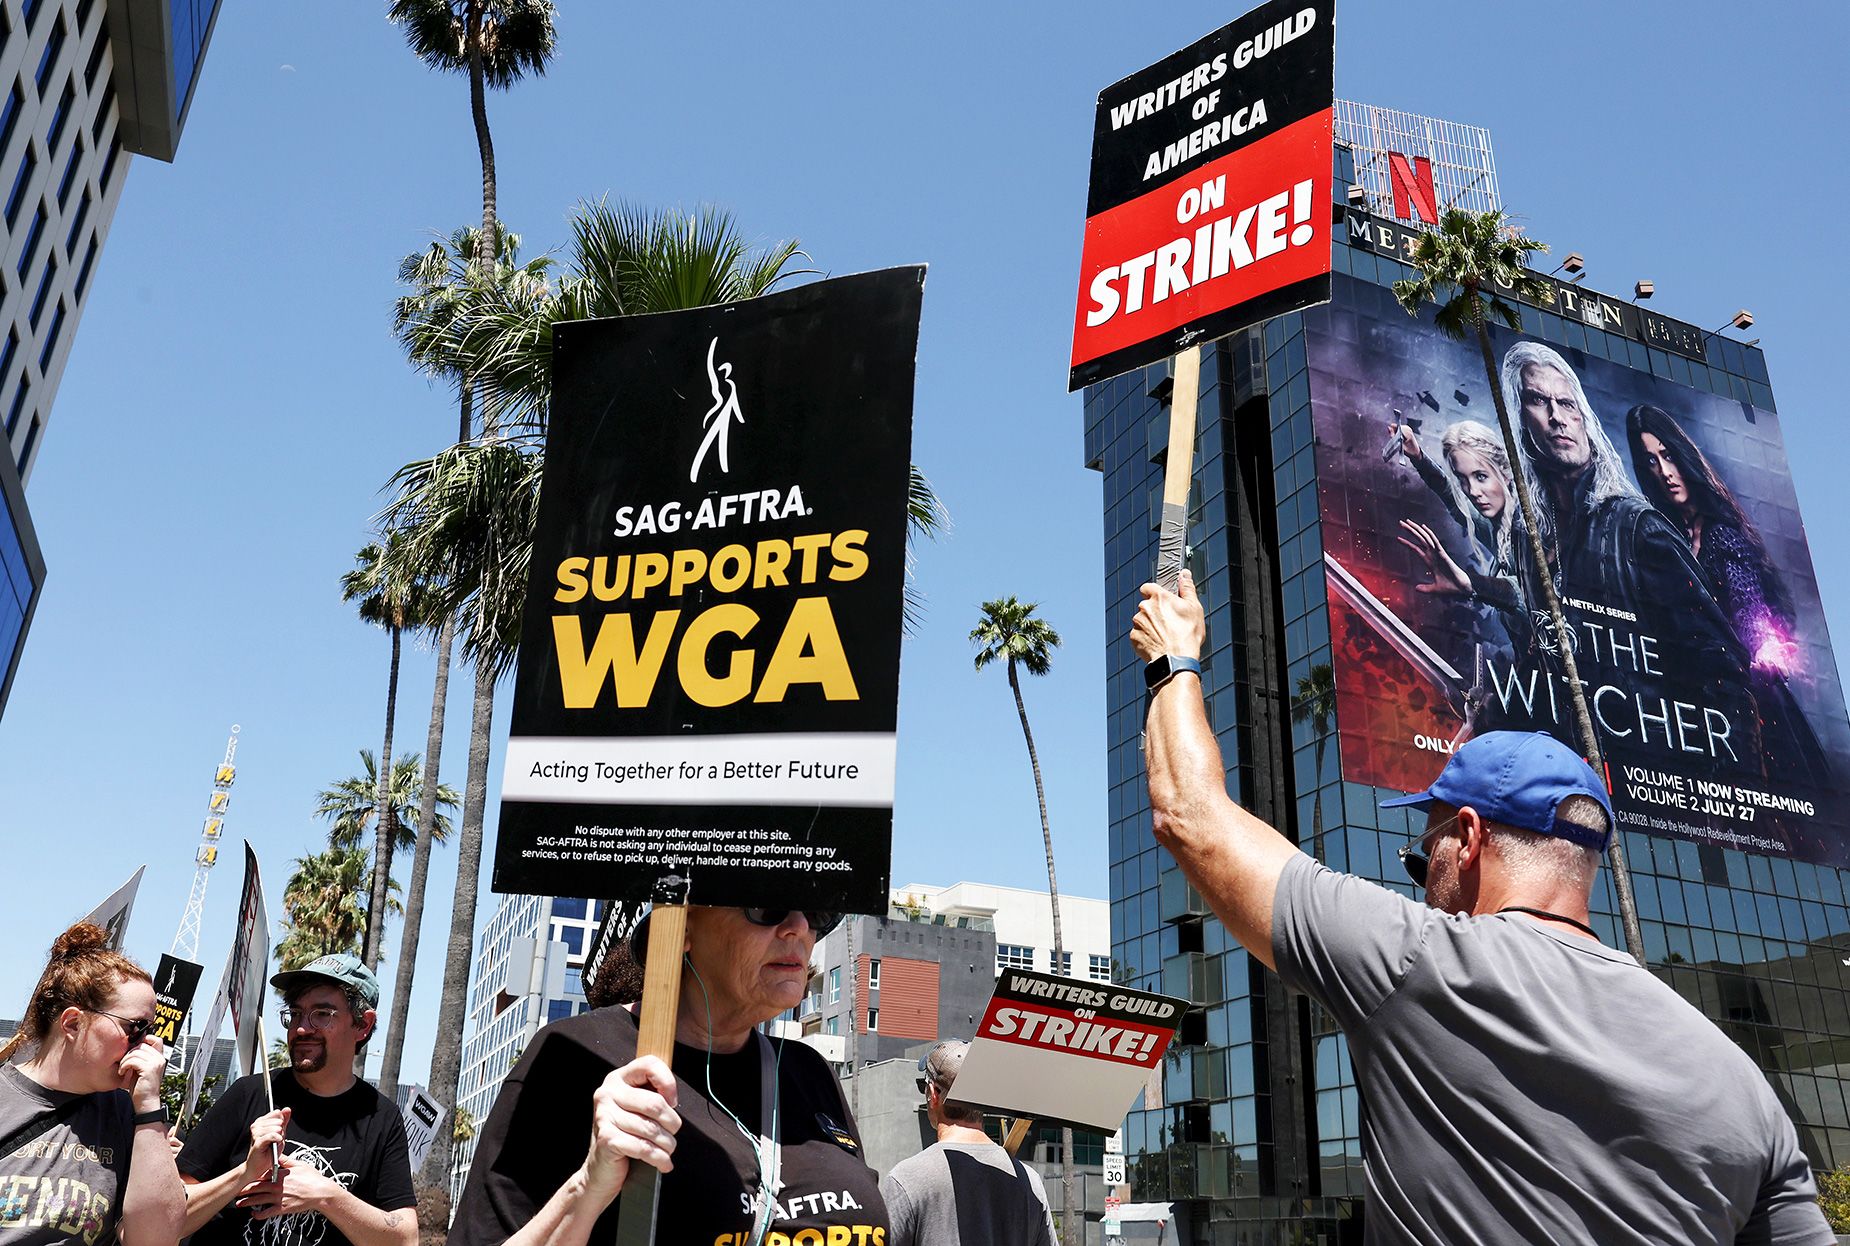 Member's of the actor's union SAG-AFTRA walk the picket line in solidarity with striking WGA (Writers Guild of America) workers outside Netflix offices in Los Angeles, California.